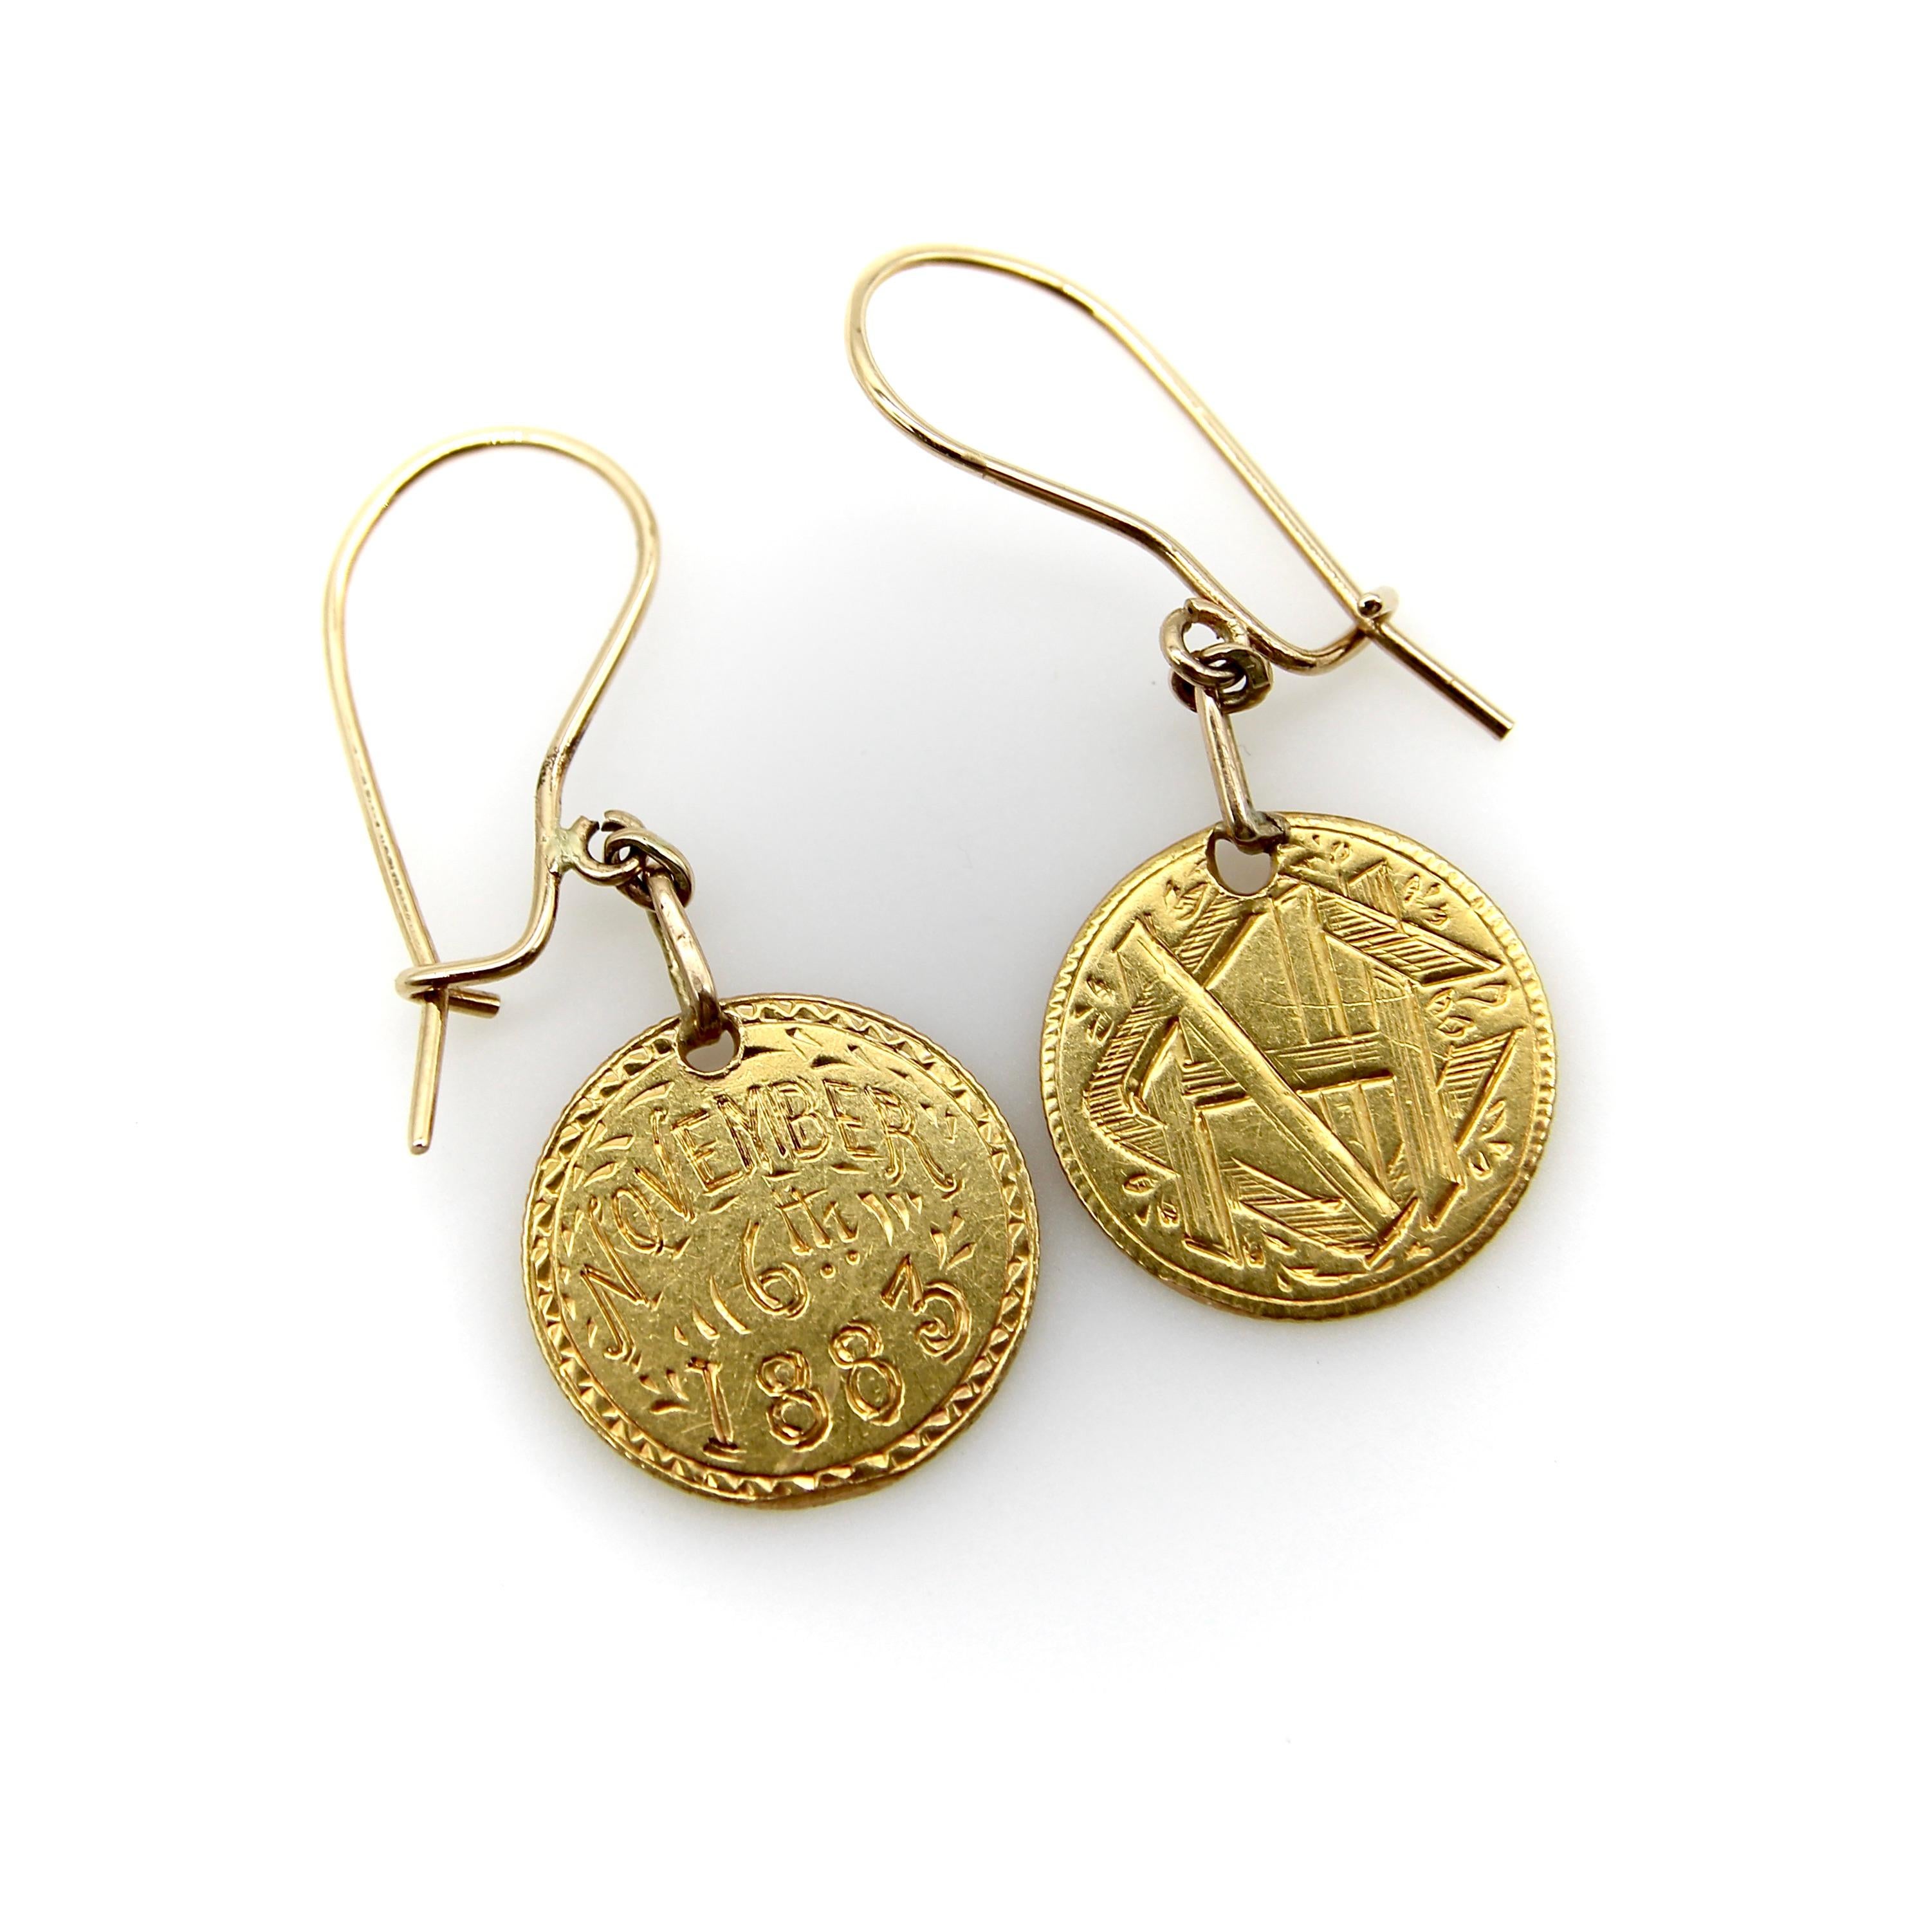 Circa 1883, these 22k gold earrings have an interesting and poetic history. Originally coins, they were hand engraved to become sentimental gifts called “love tokens,” a popular tradition of the 19th century. These coins are a matching, but slightly